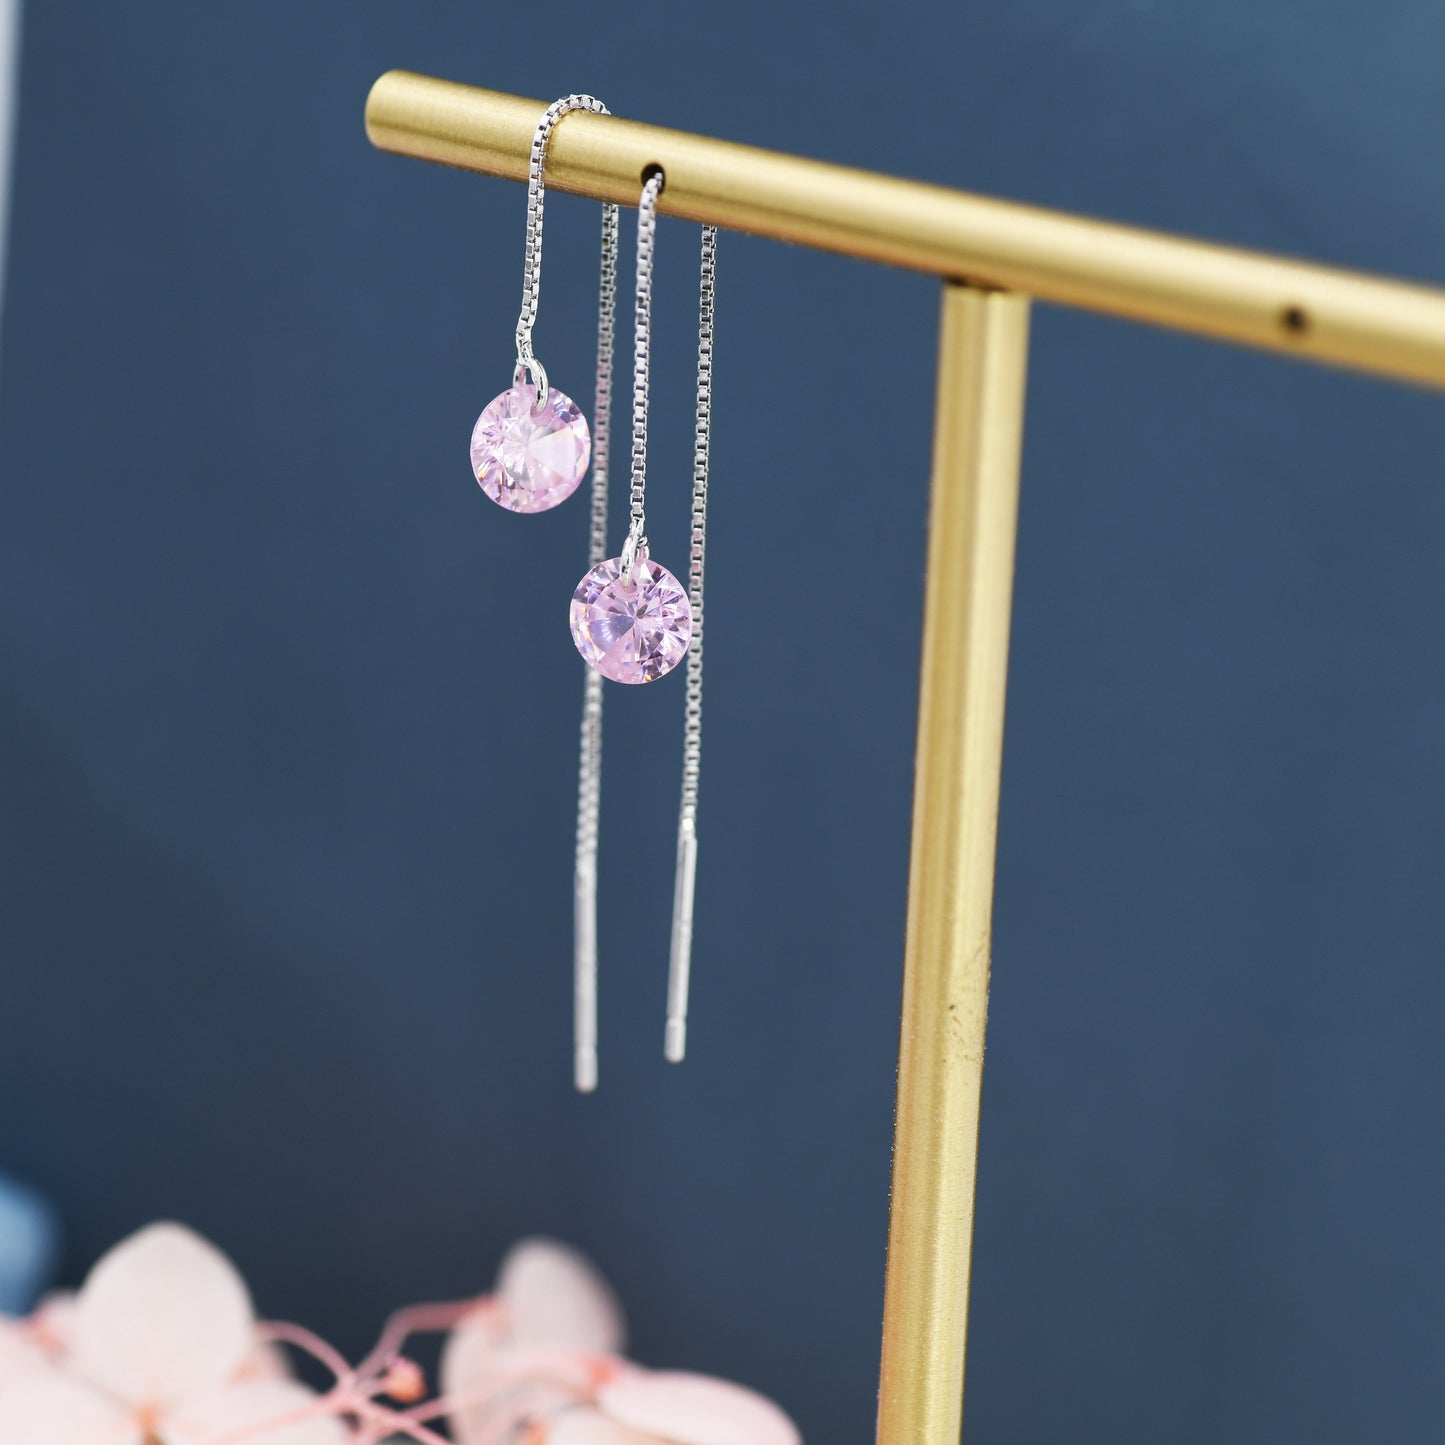 Alexandrite Pink CZ Dot Threader Earrings in Sterling Silver, Silver or Gold, Minimalist Ear Threaders, October Birthstone